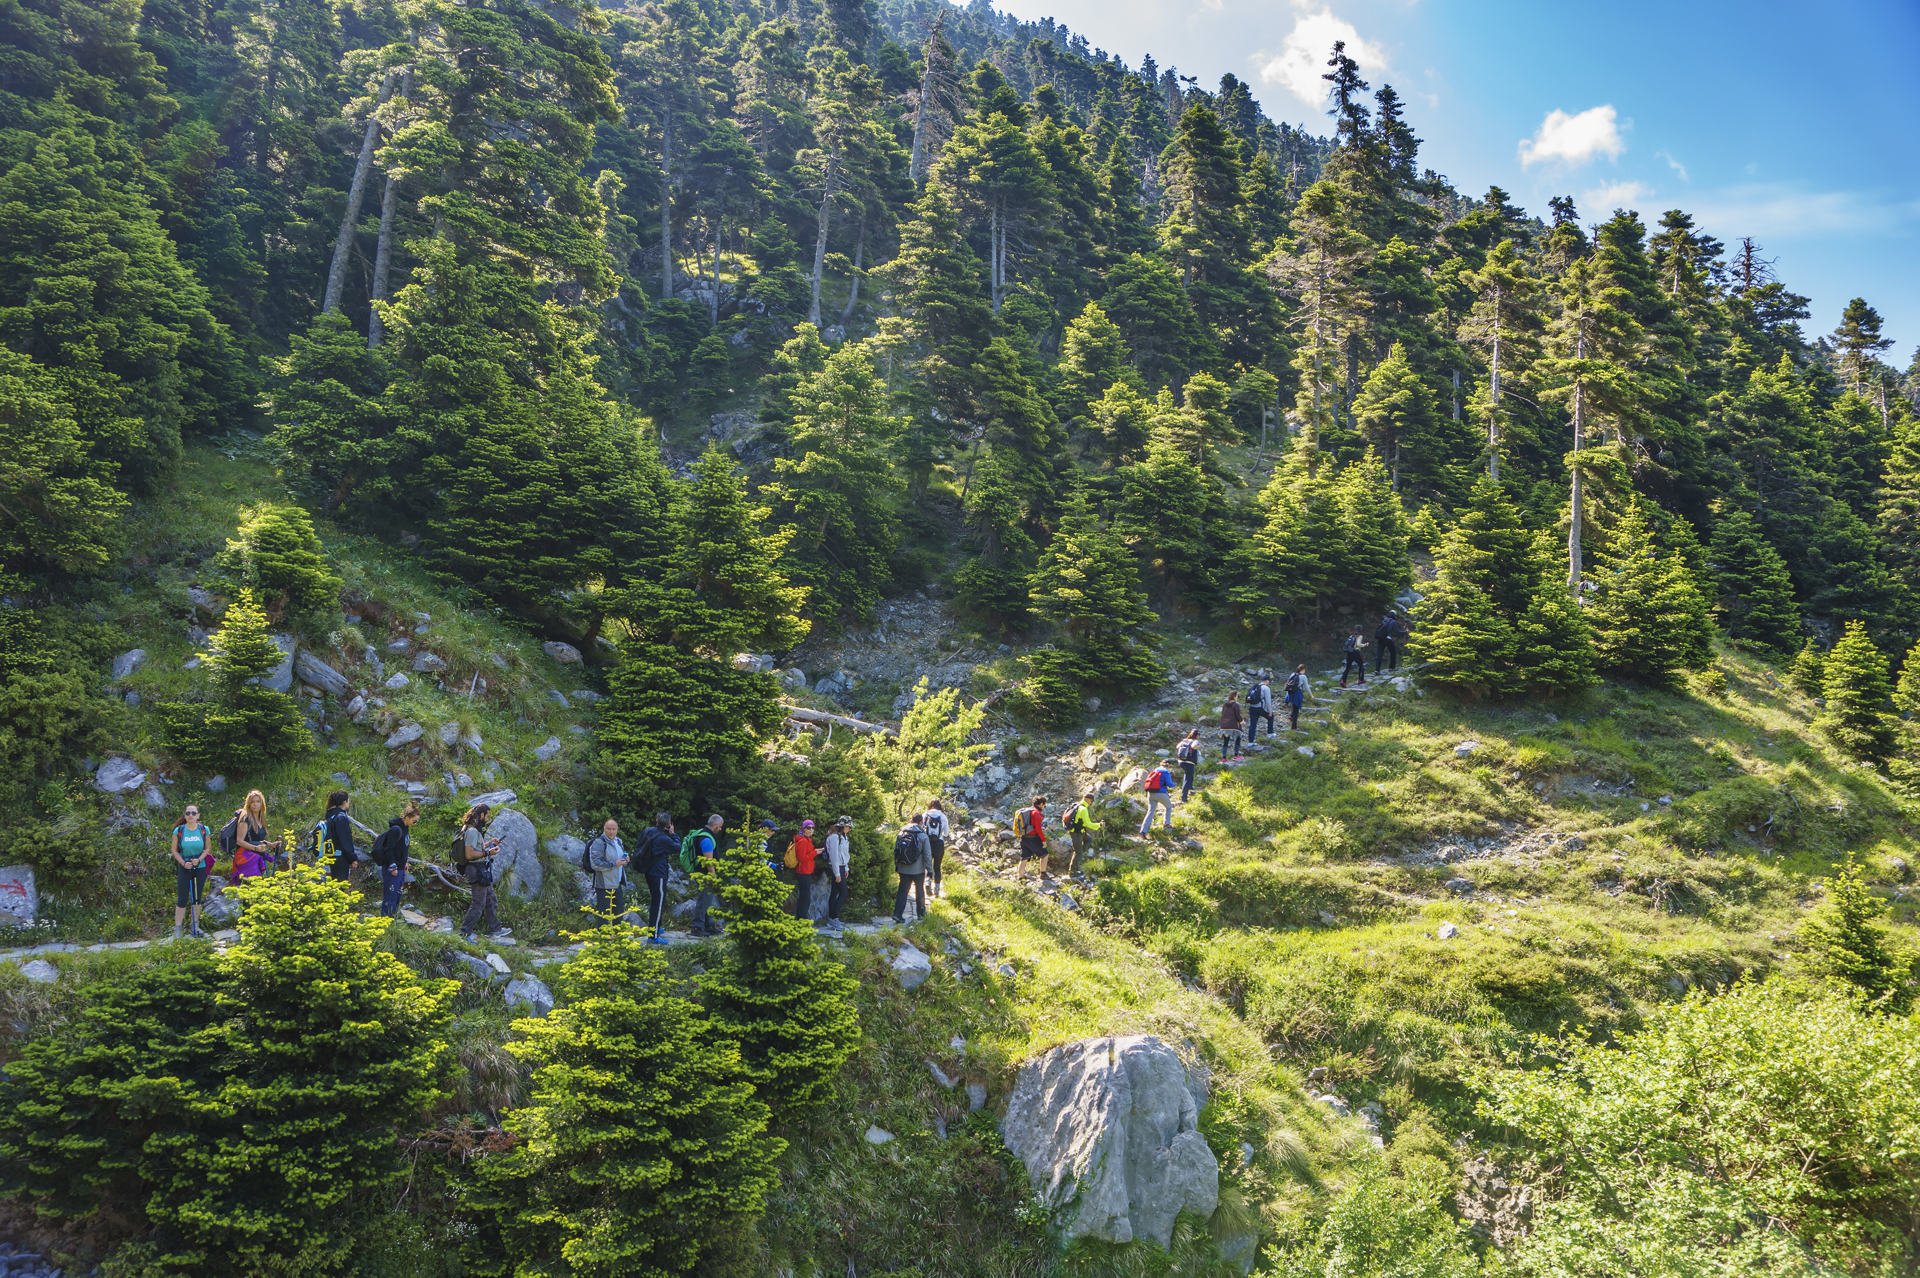 The famous Dirfys forest. It is a natural forest located on a mountain in the central part of the island of Euboea, Greece at 1,743 m elevation.The path leads to Agali Canyon.